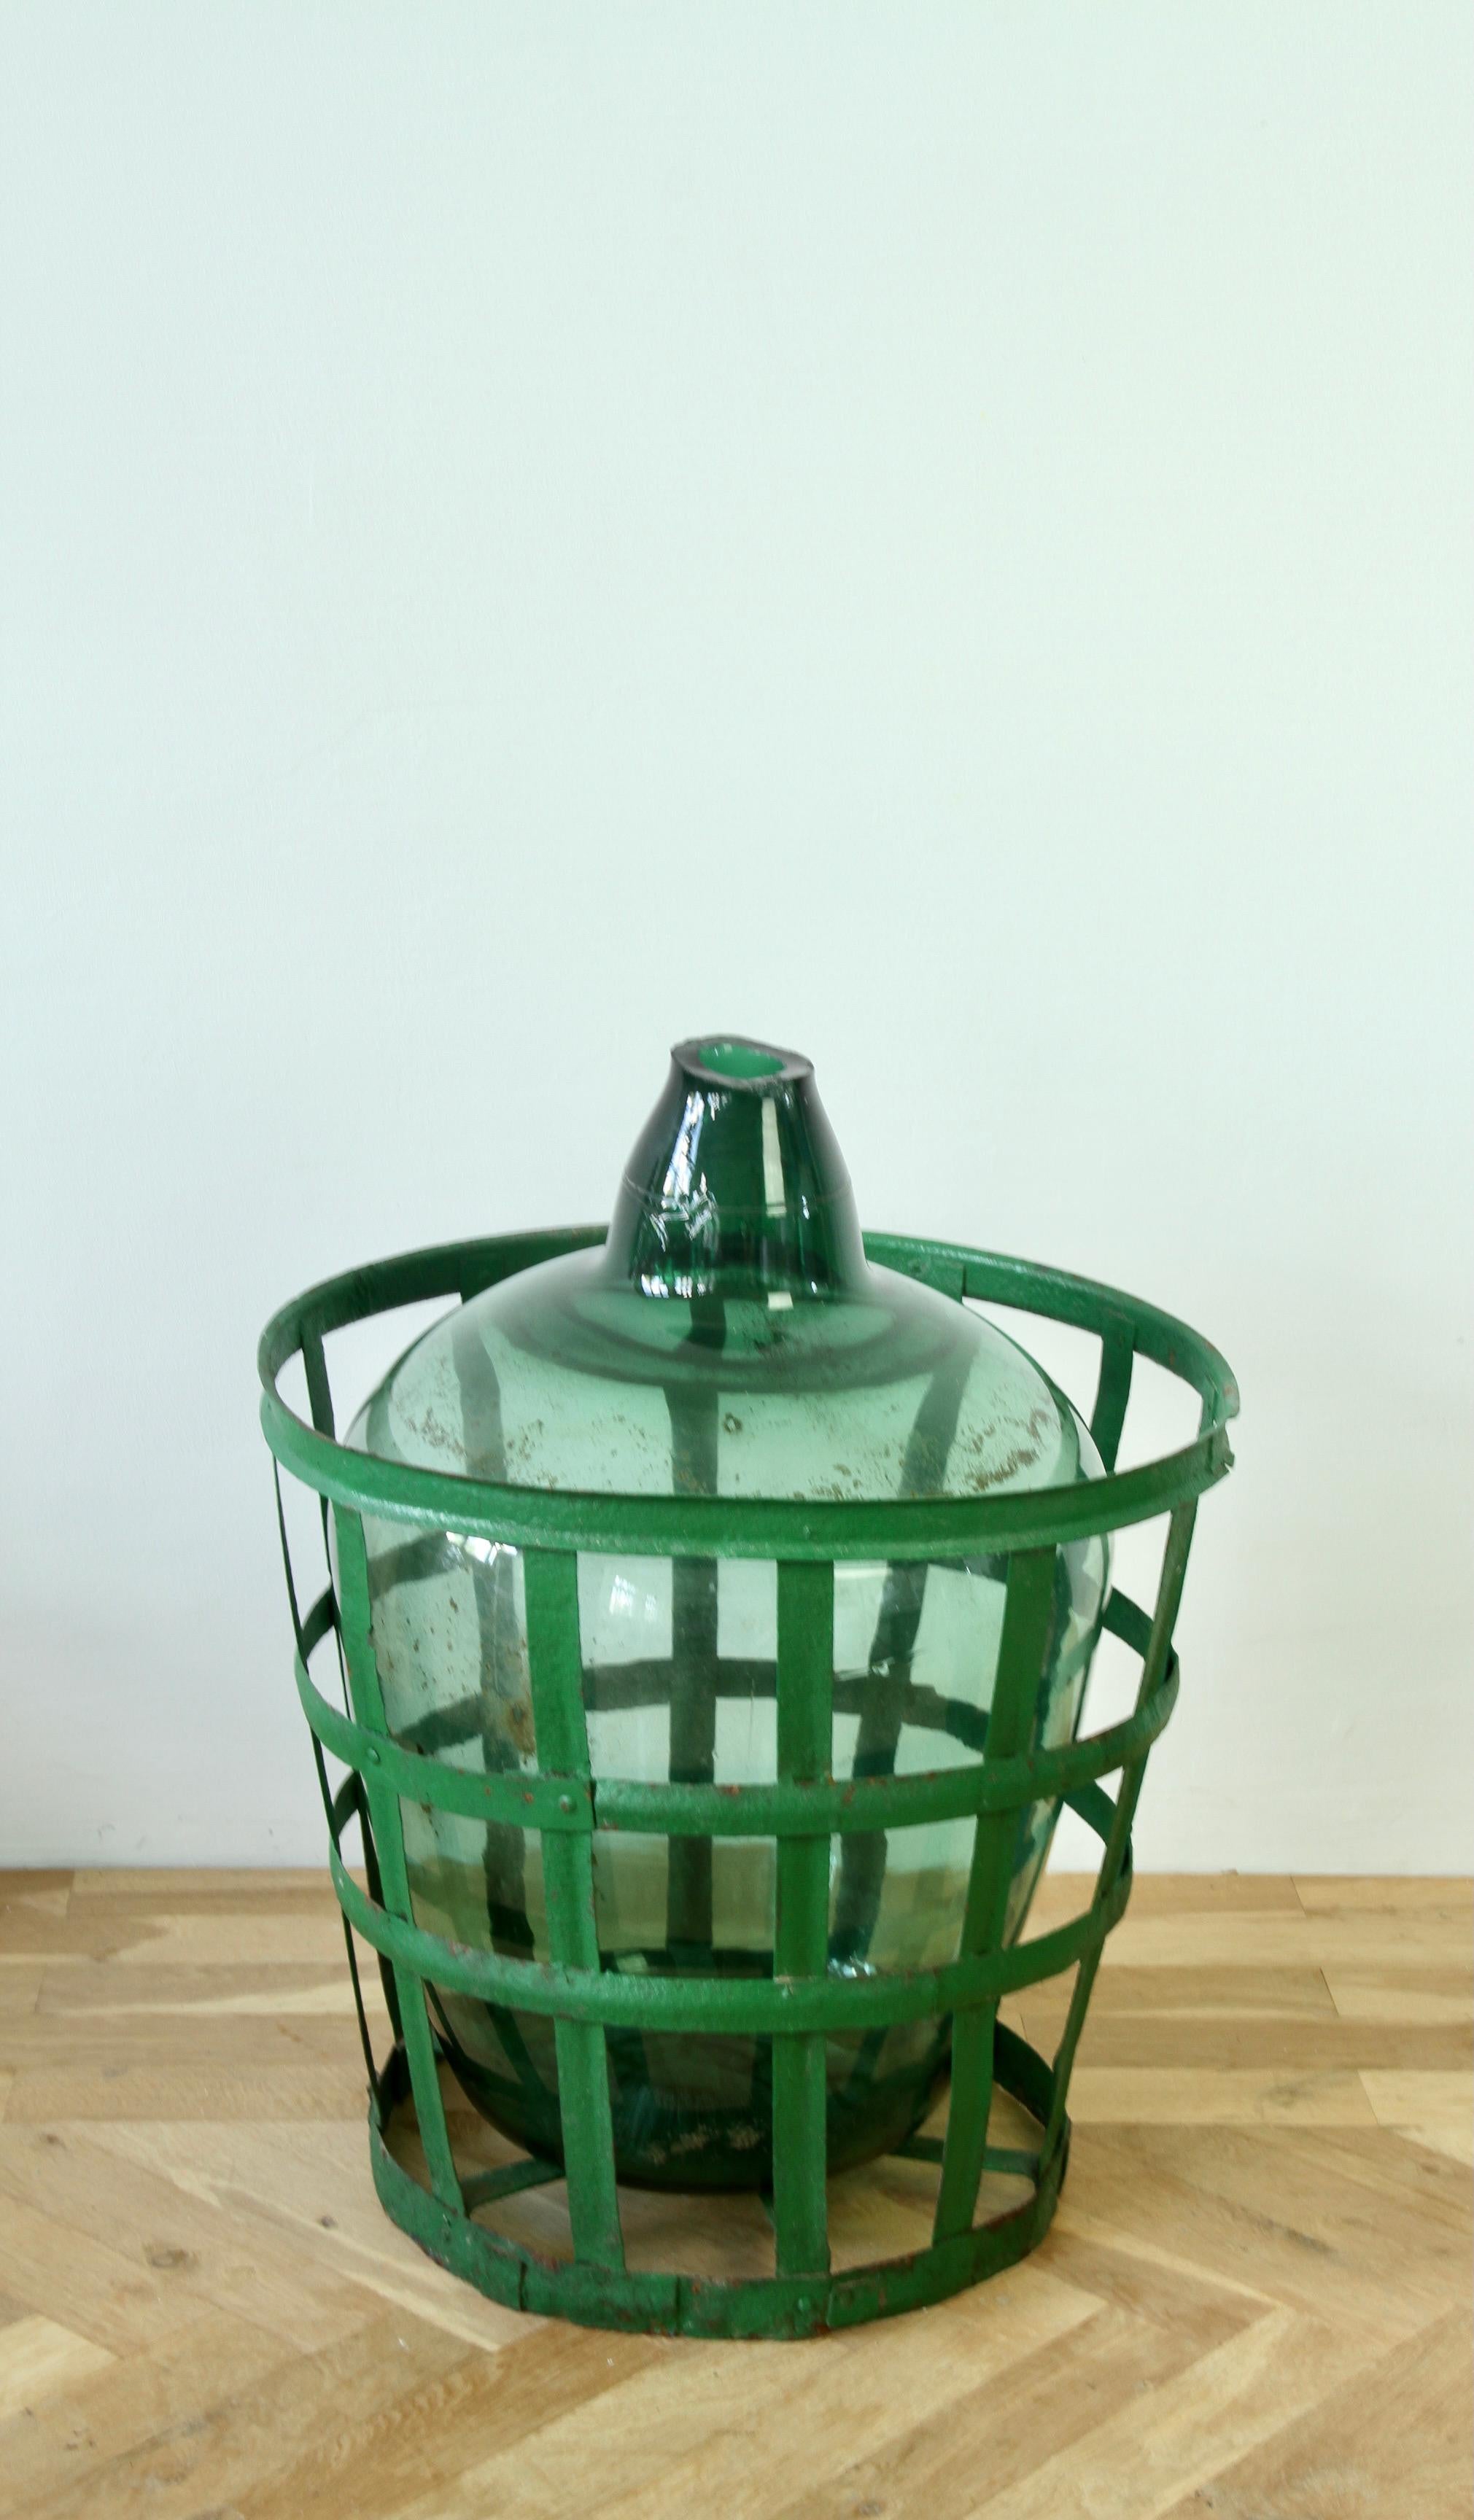 Painted Large Green Glass Hungarian Demijohn, Amphora or Vase with Original Iron Basket For Sale